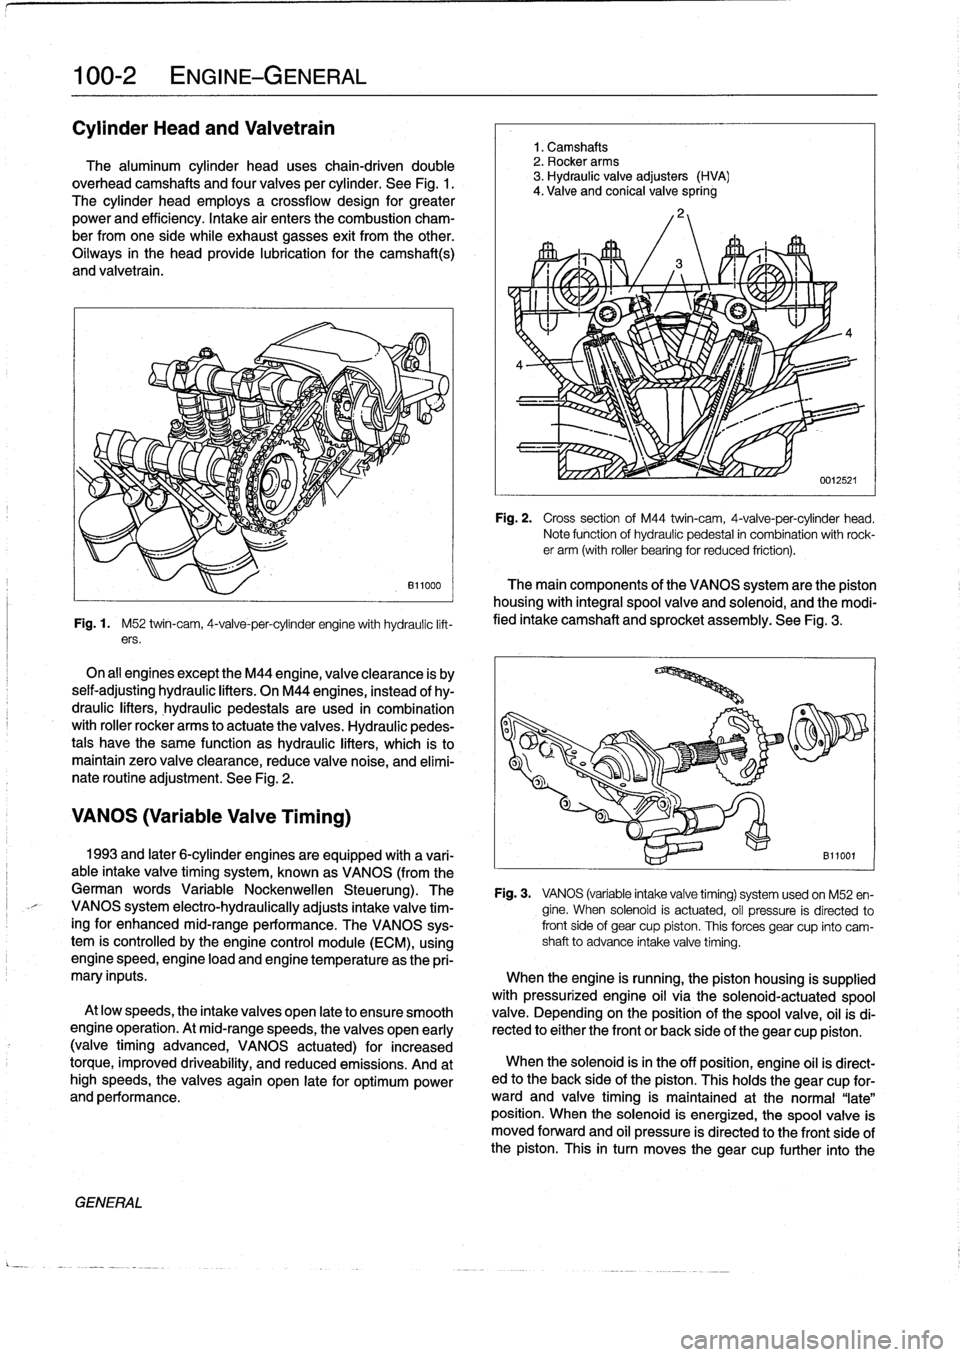 BMW 318i 1995 E36 Workshop Manual 
100-2
ENGINE-GENERAL

Cylinder
Head
and
Valvetrain

The
aluminum
cylinder
head
uses
chain-driven
double
overhead
camshafts
and
four
valves
per
cylinder
.
See
Fig
.
1
.

The
cylinder
head
employs
a
cr